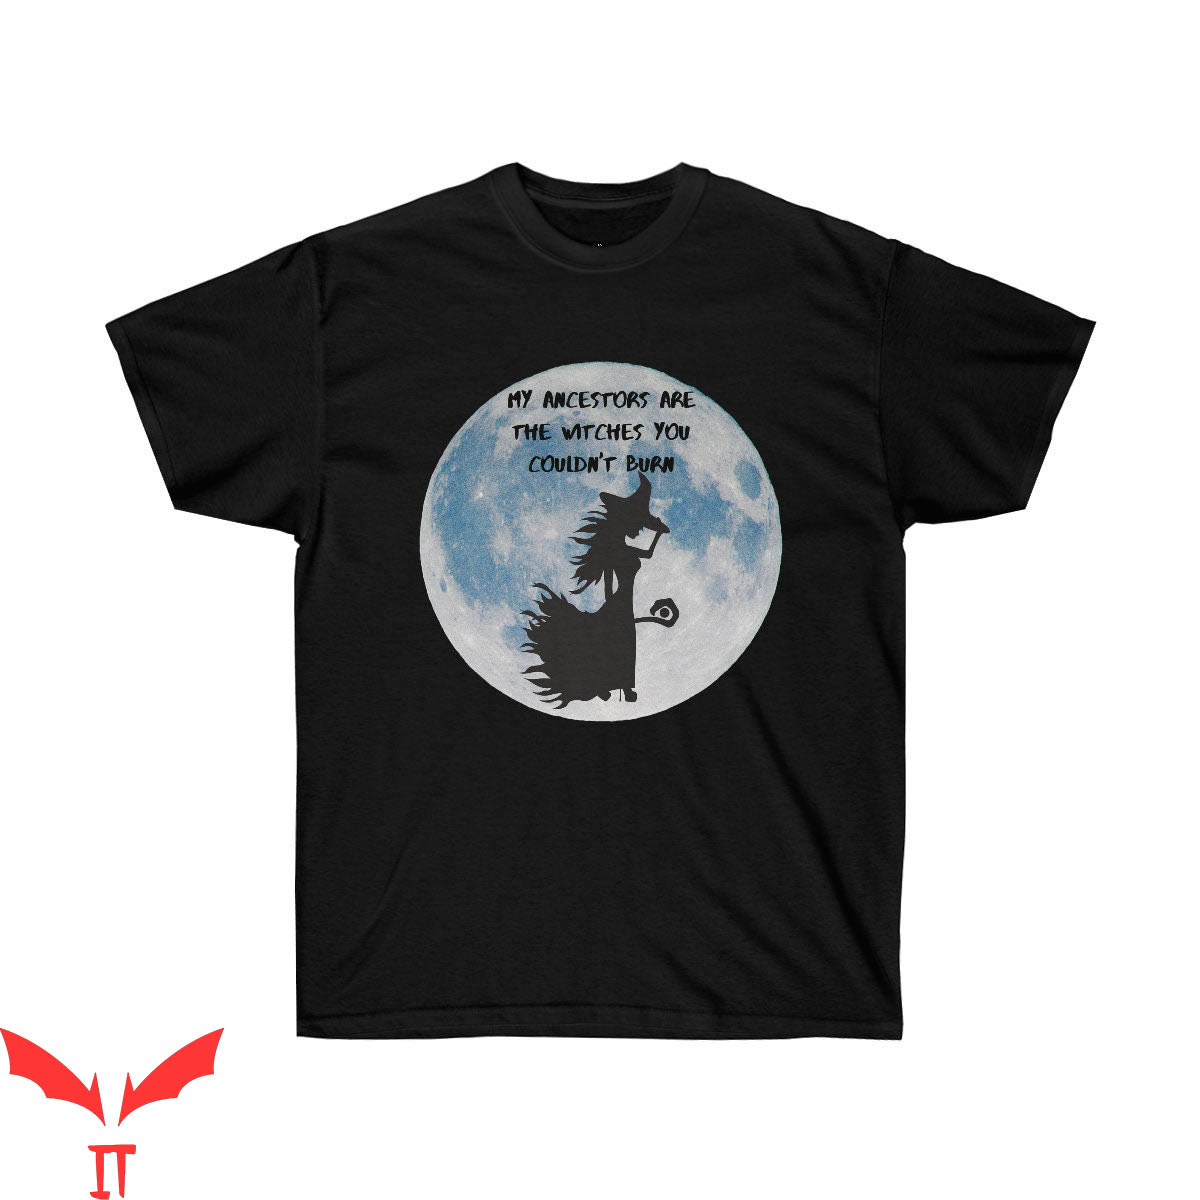 My Ancestor T-Shirt Are The Witches You Couldn't Burn Tee